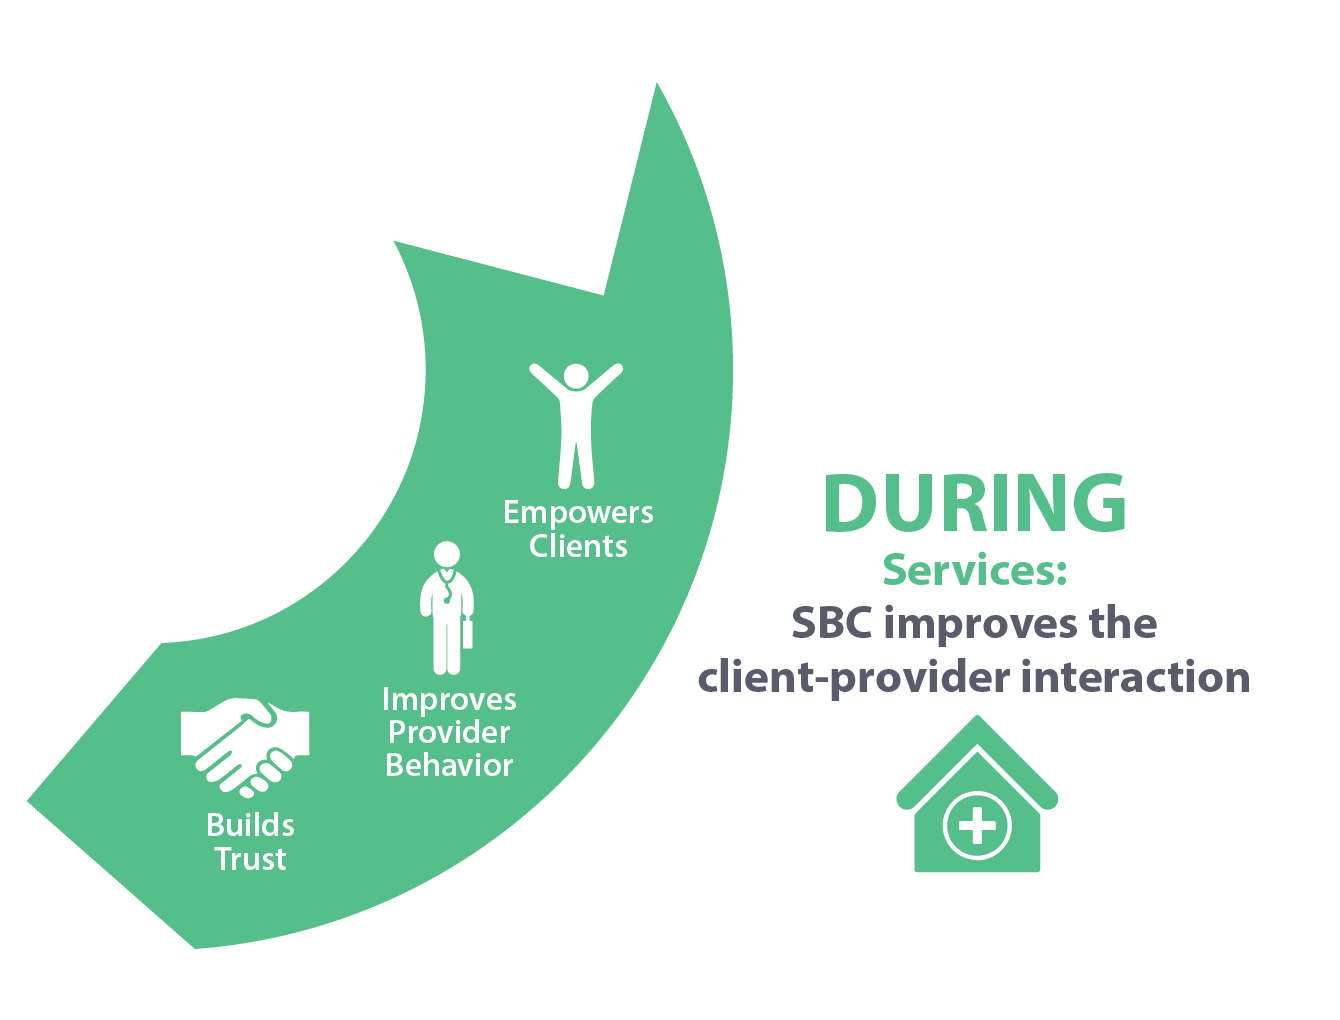 During services: SBC improves the client-provider interaction